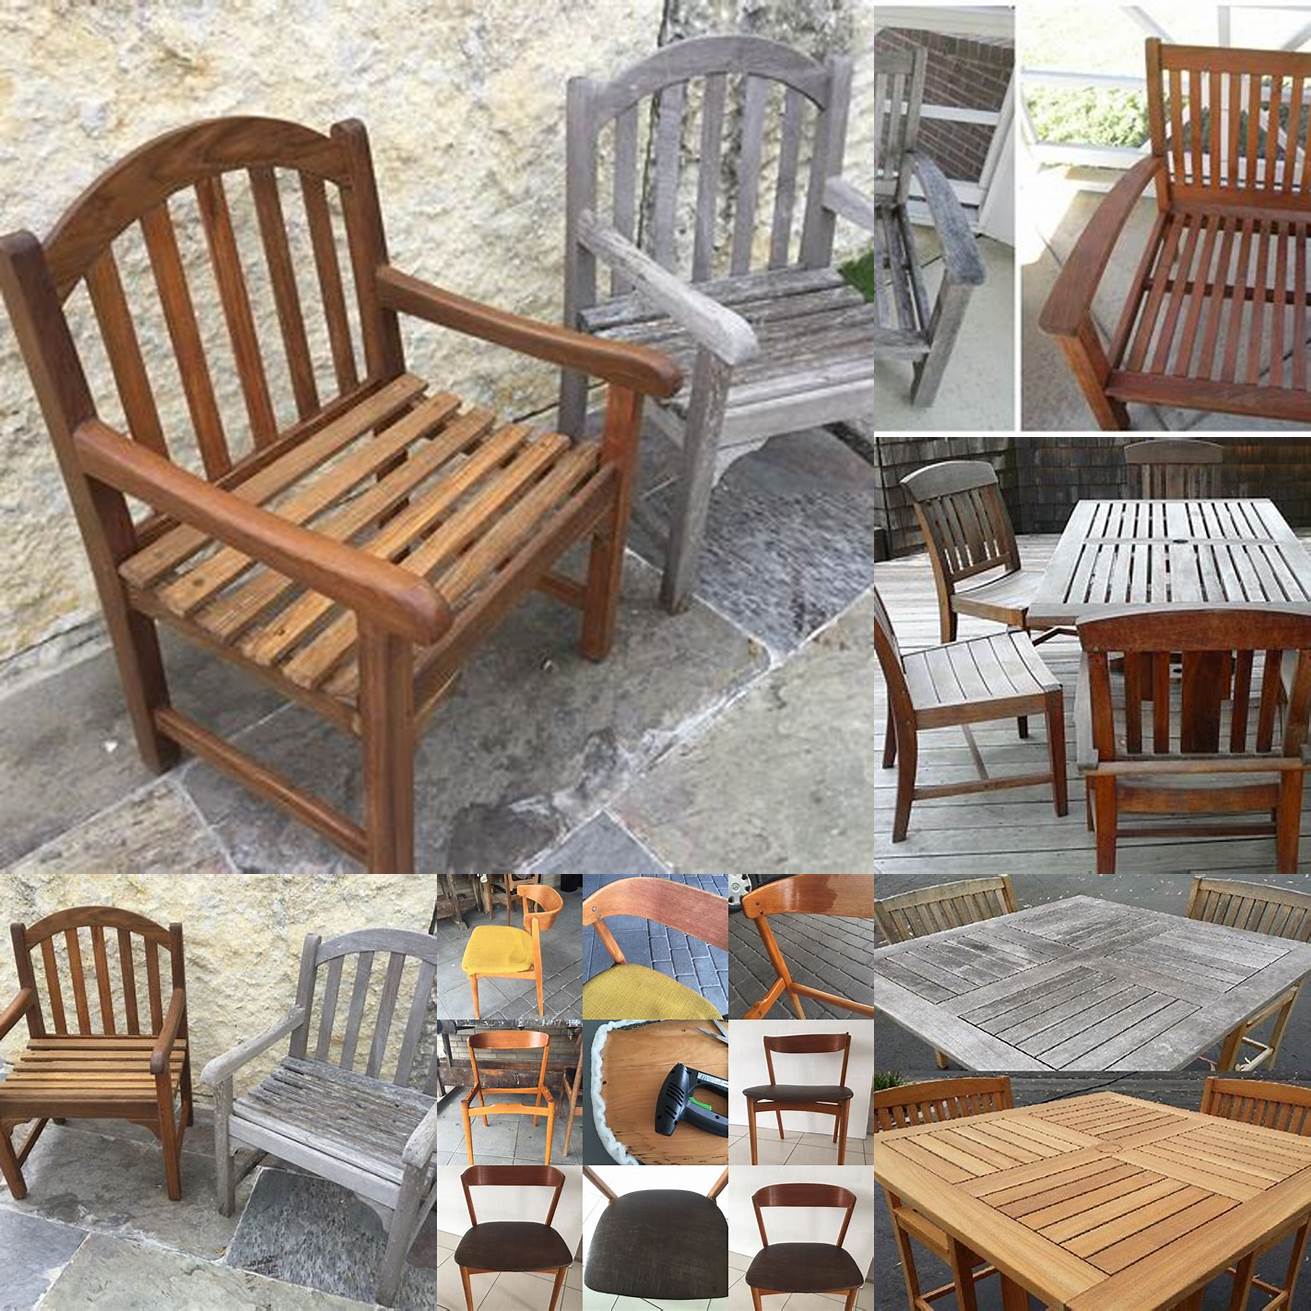 Before and After Photos of Teak Furniture in Different Settings